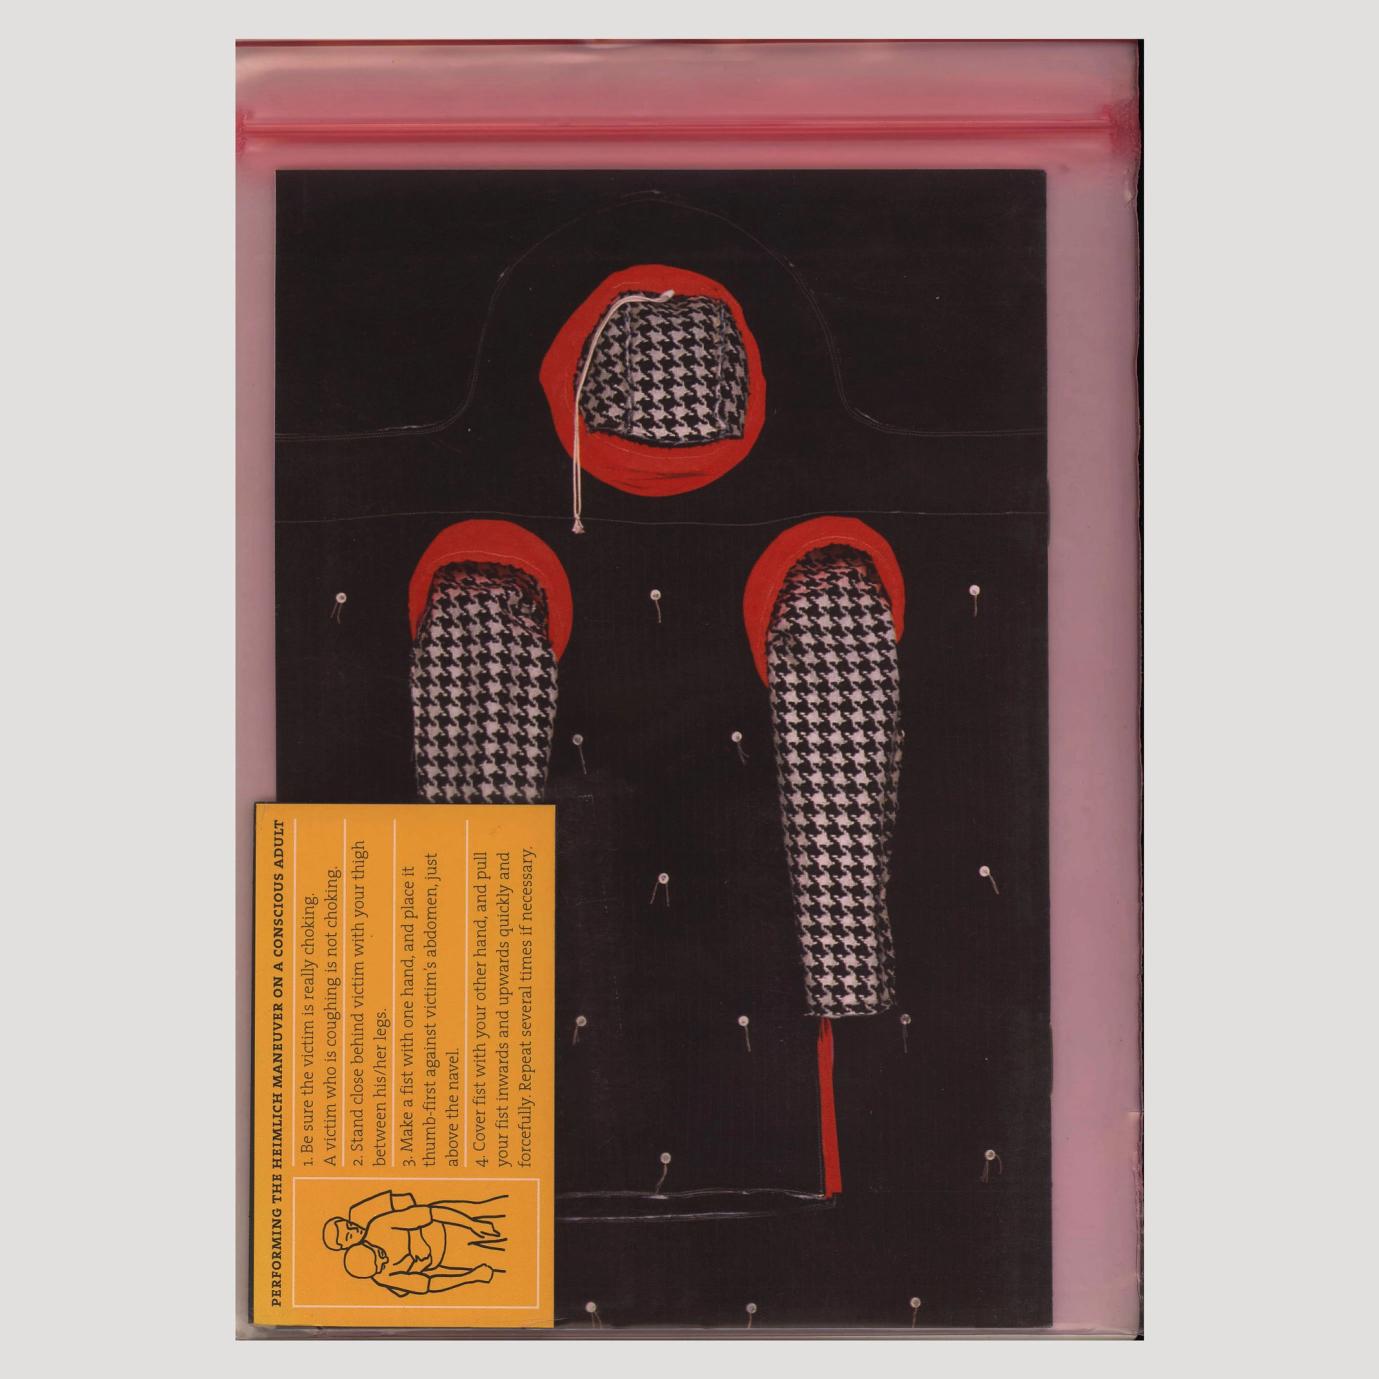 This is an image of the back of a book concealed in a pink, transparent zip-loc plastic bag. On the back cover is a photo of an artwork. The artwork is a wearable sculpture, has a hood and two long sleeves, all made of houndstooth patterned fabric. Where the hood and sleeves connect to the body, there is a thick red fabric acting as a border between the hood, the sleeves, and the body. The body of the sculpture is a rectangular shape, is black, and has small white buttons with two thin threads emerging from the buttons. The buttons are scattered spaciously on the body of the wearable. Included in the zip-loc bag on top of the book is a rectangular yellow magnet describing how to perform the heimlich maneuver on a conscious adult. There is a line drawing illustration of a person giving the heimlich maneuver to another person.